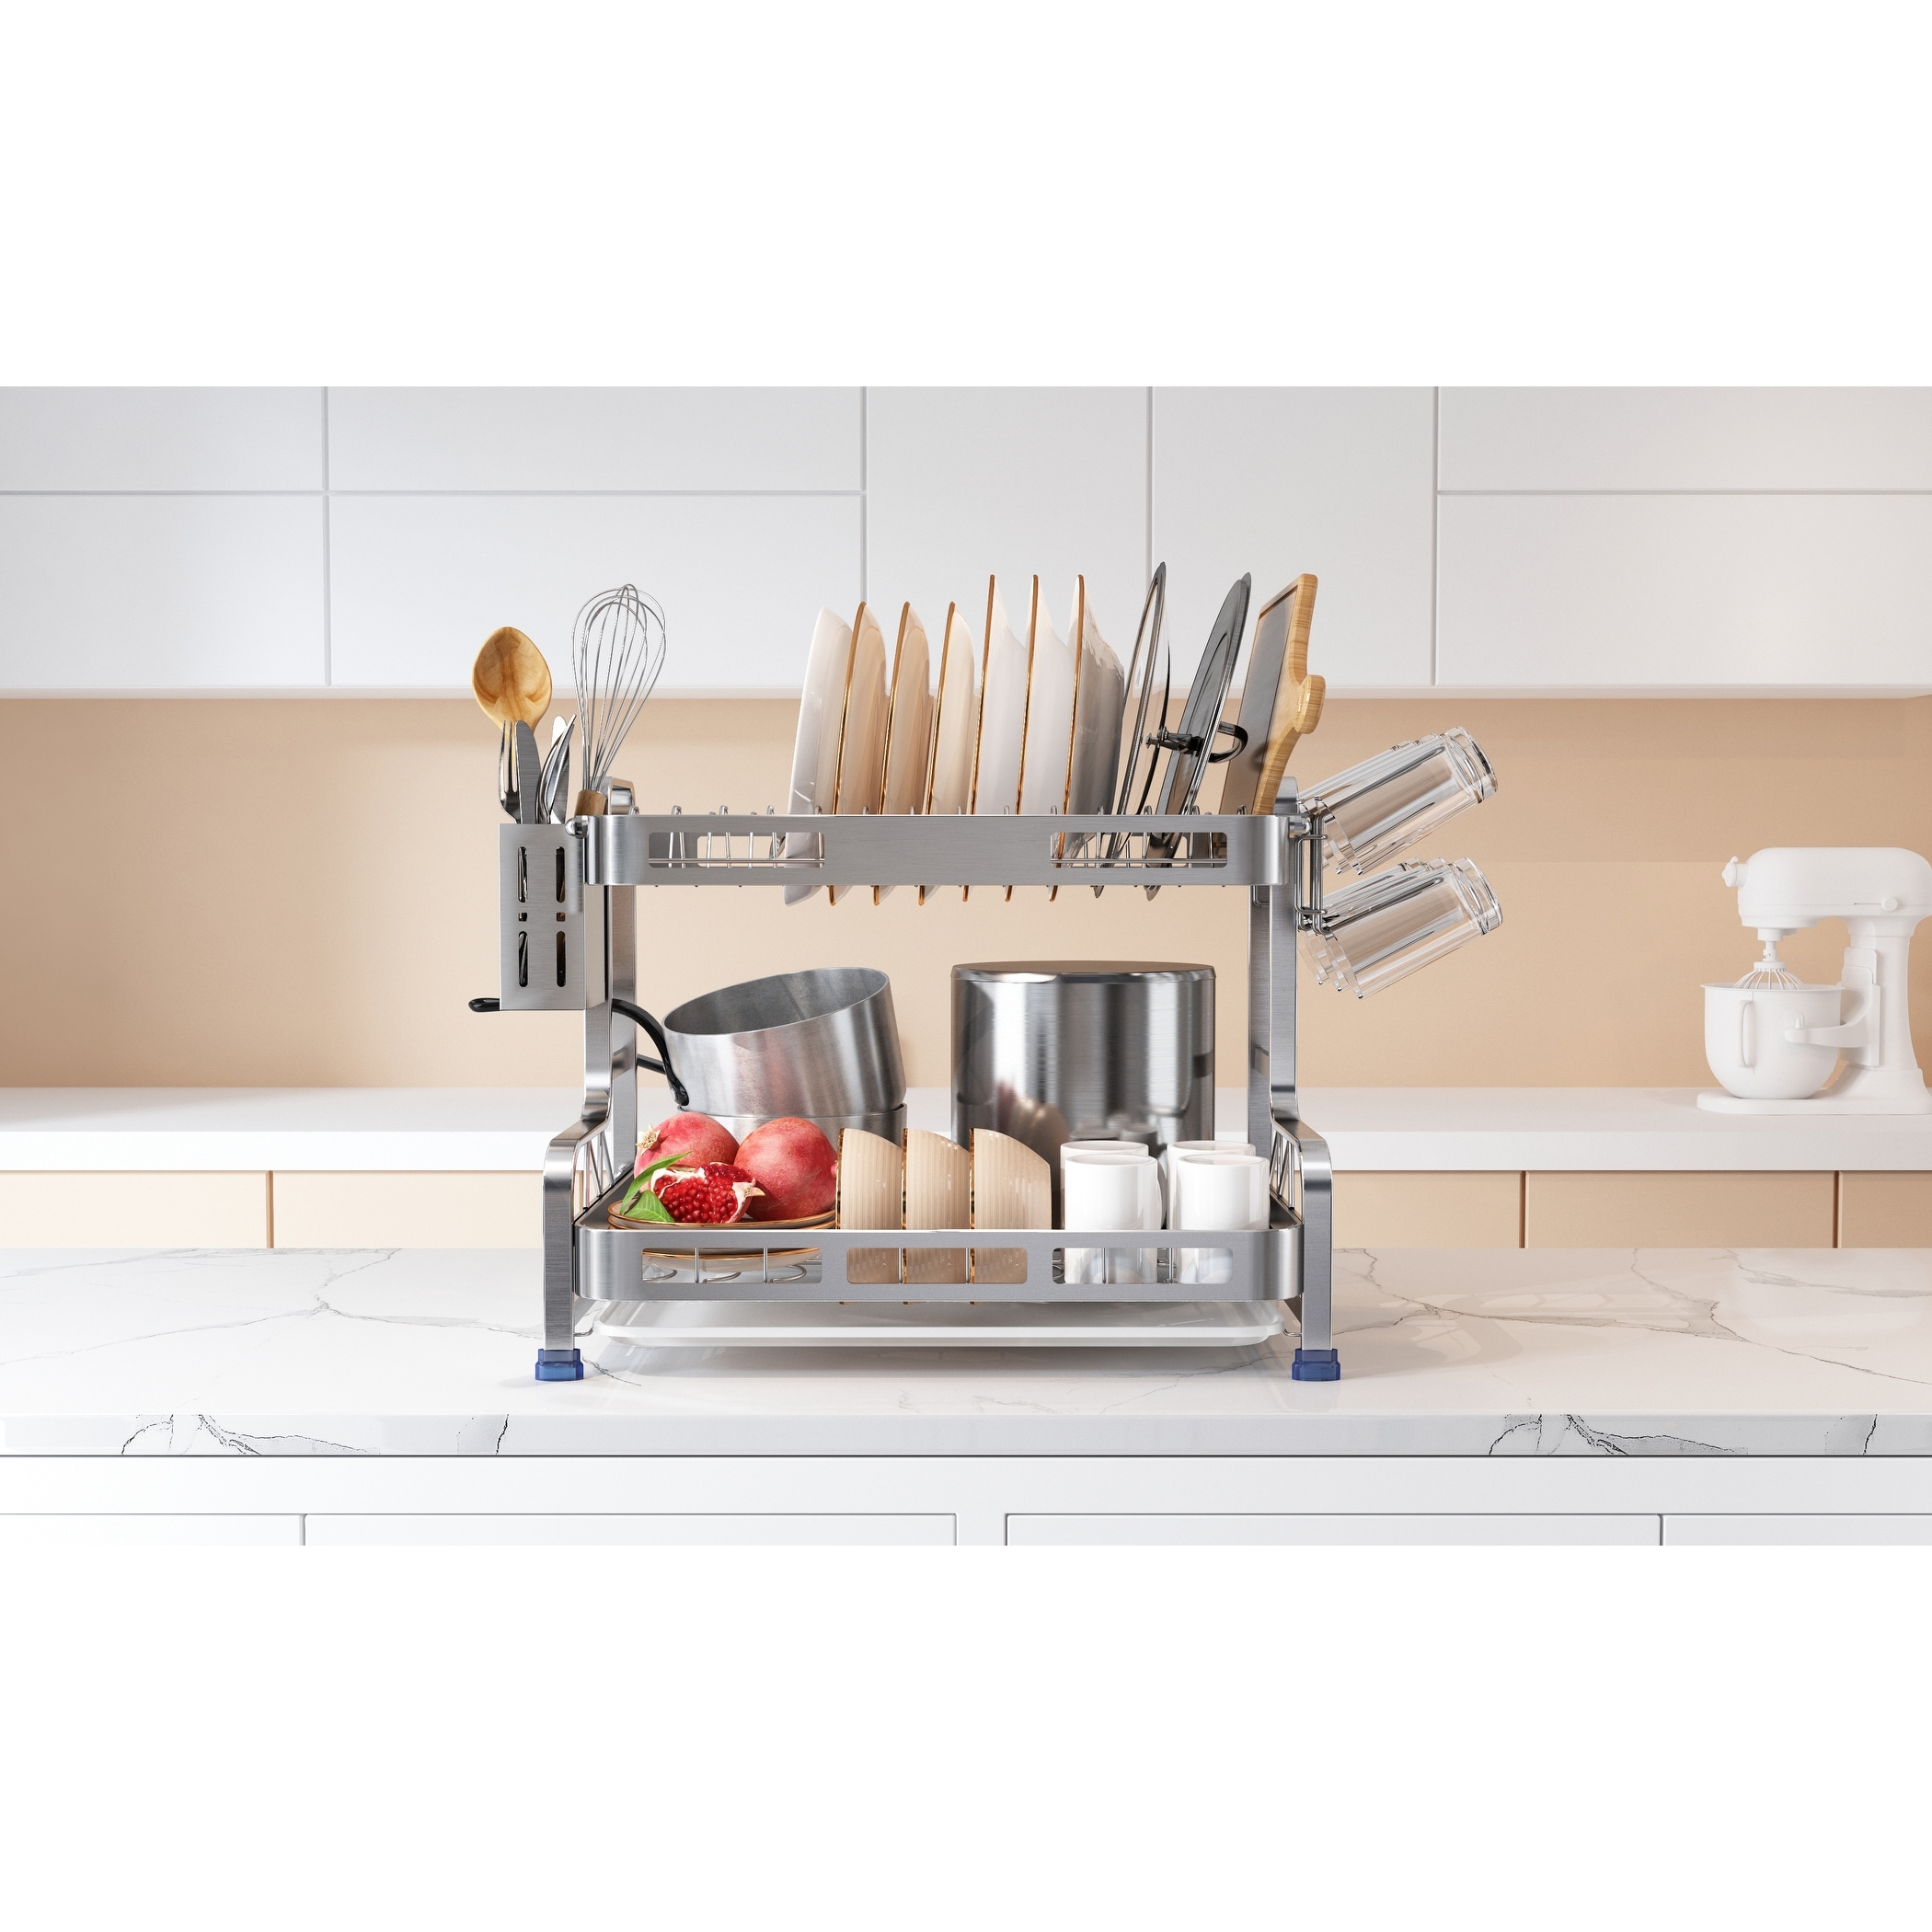 https://ak1.ostkcdn.com/images/products/is/images/direct/480389a42dfbcc15c5944e6663b842f0e96585e4/2-Tier-Kitchen-Stainless-Steel-Dish-Rack-with-Cutlery-Holder.jpg